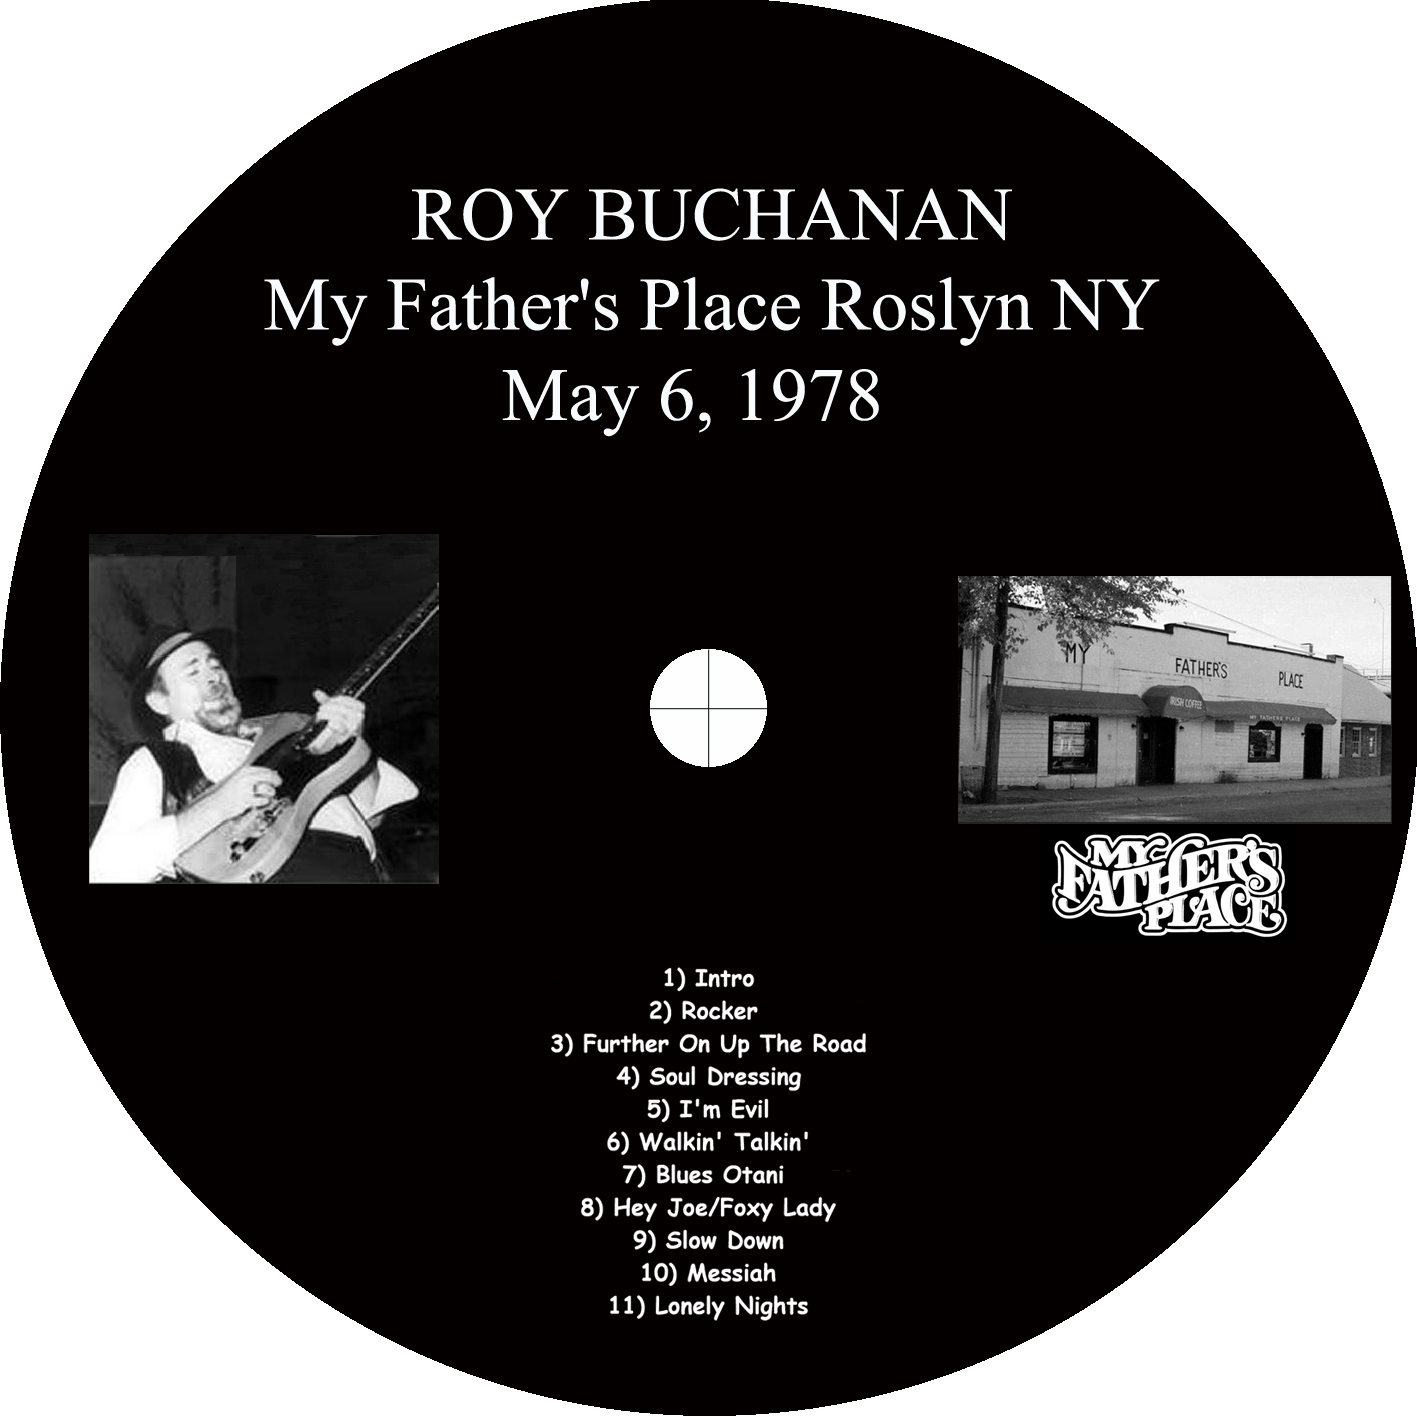 roy buchanan 1978 05 06 at my father's place label tracks geetarz